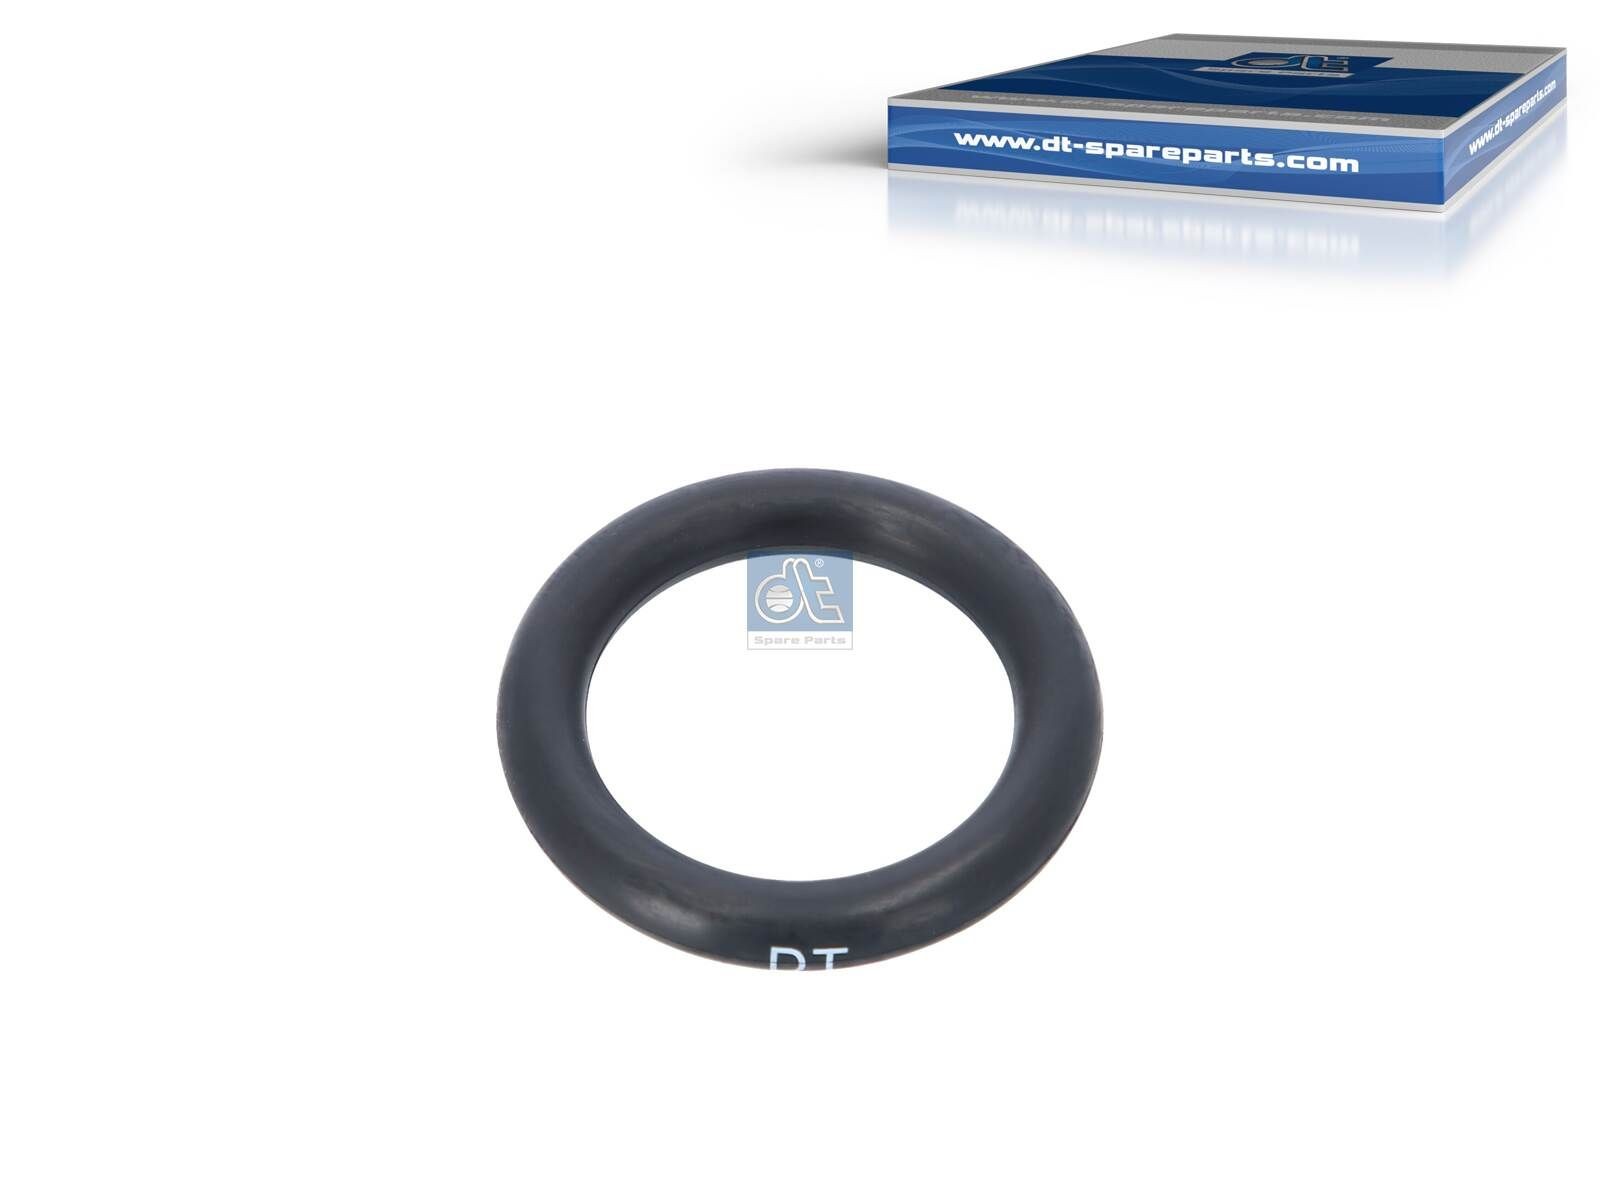 DT Spare Parts 31 x 6,5 mm, O-Ring, NBR (nitrile butadiene rubber) Seal Ring 1.24251 buy